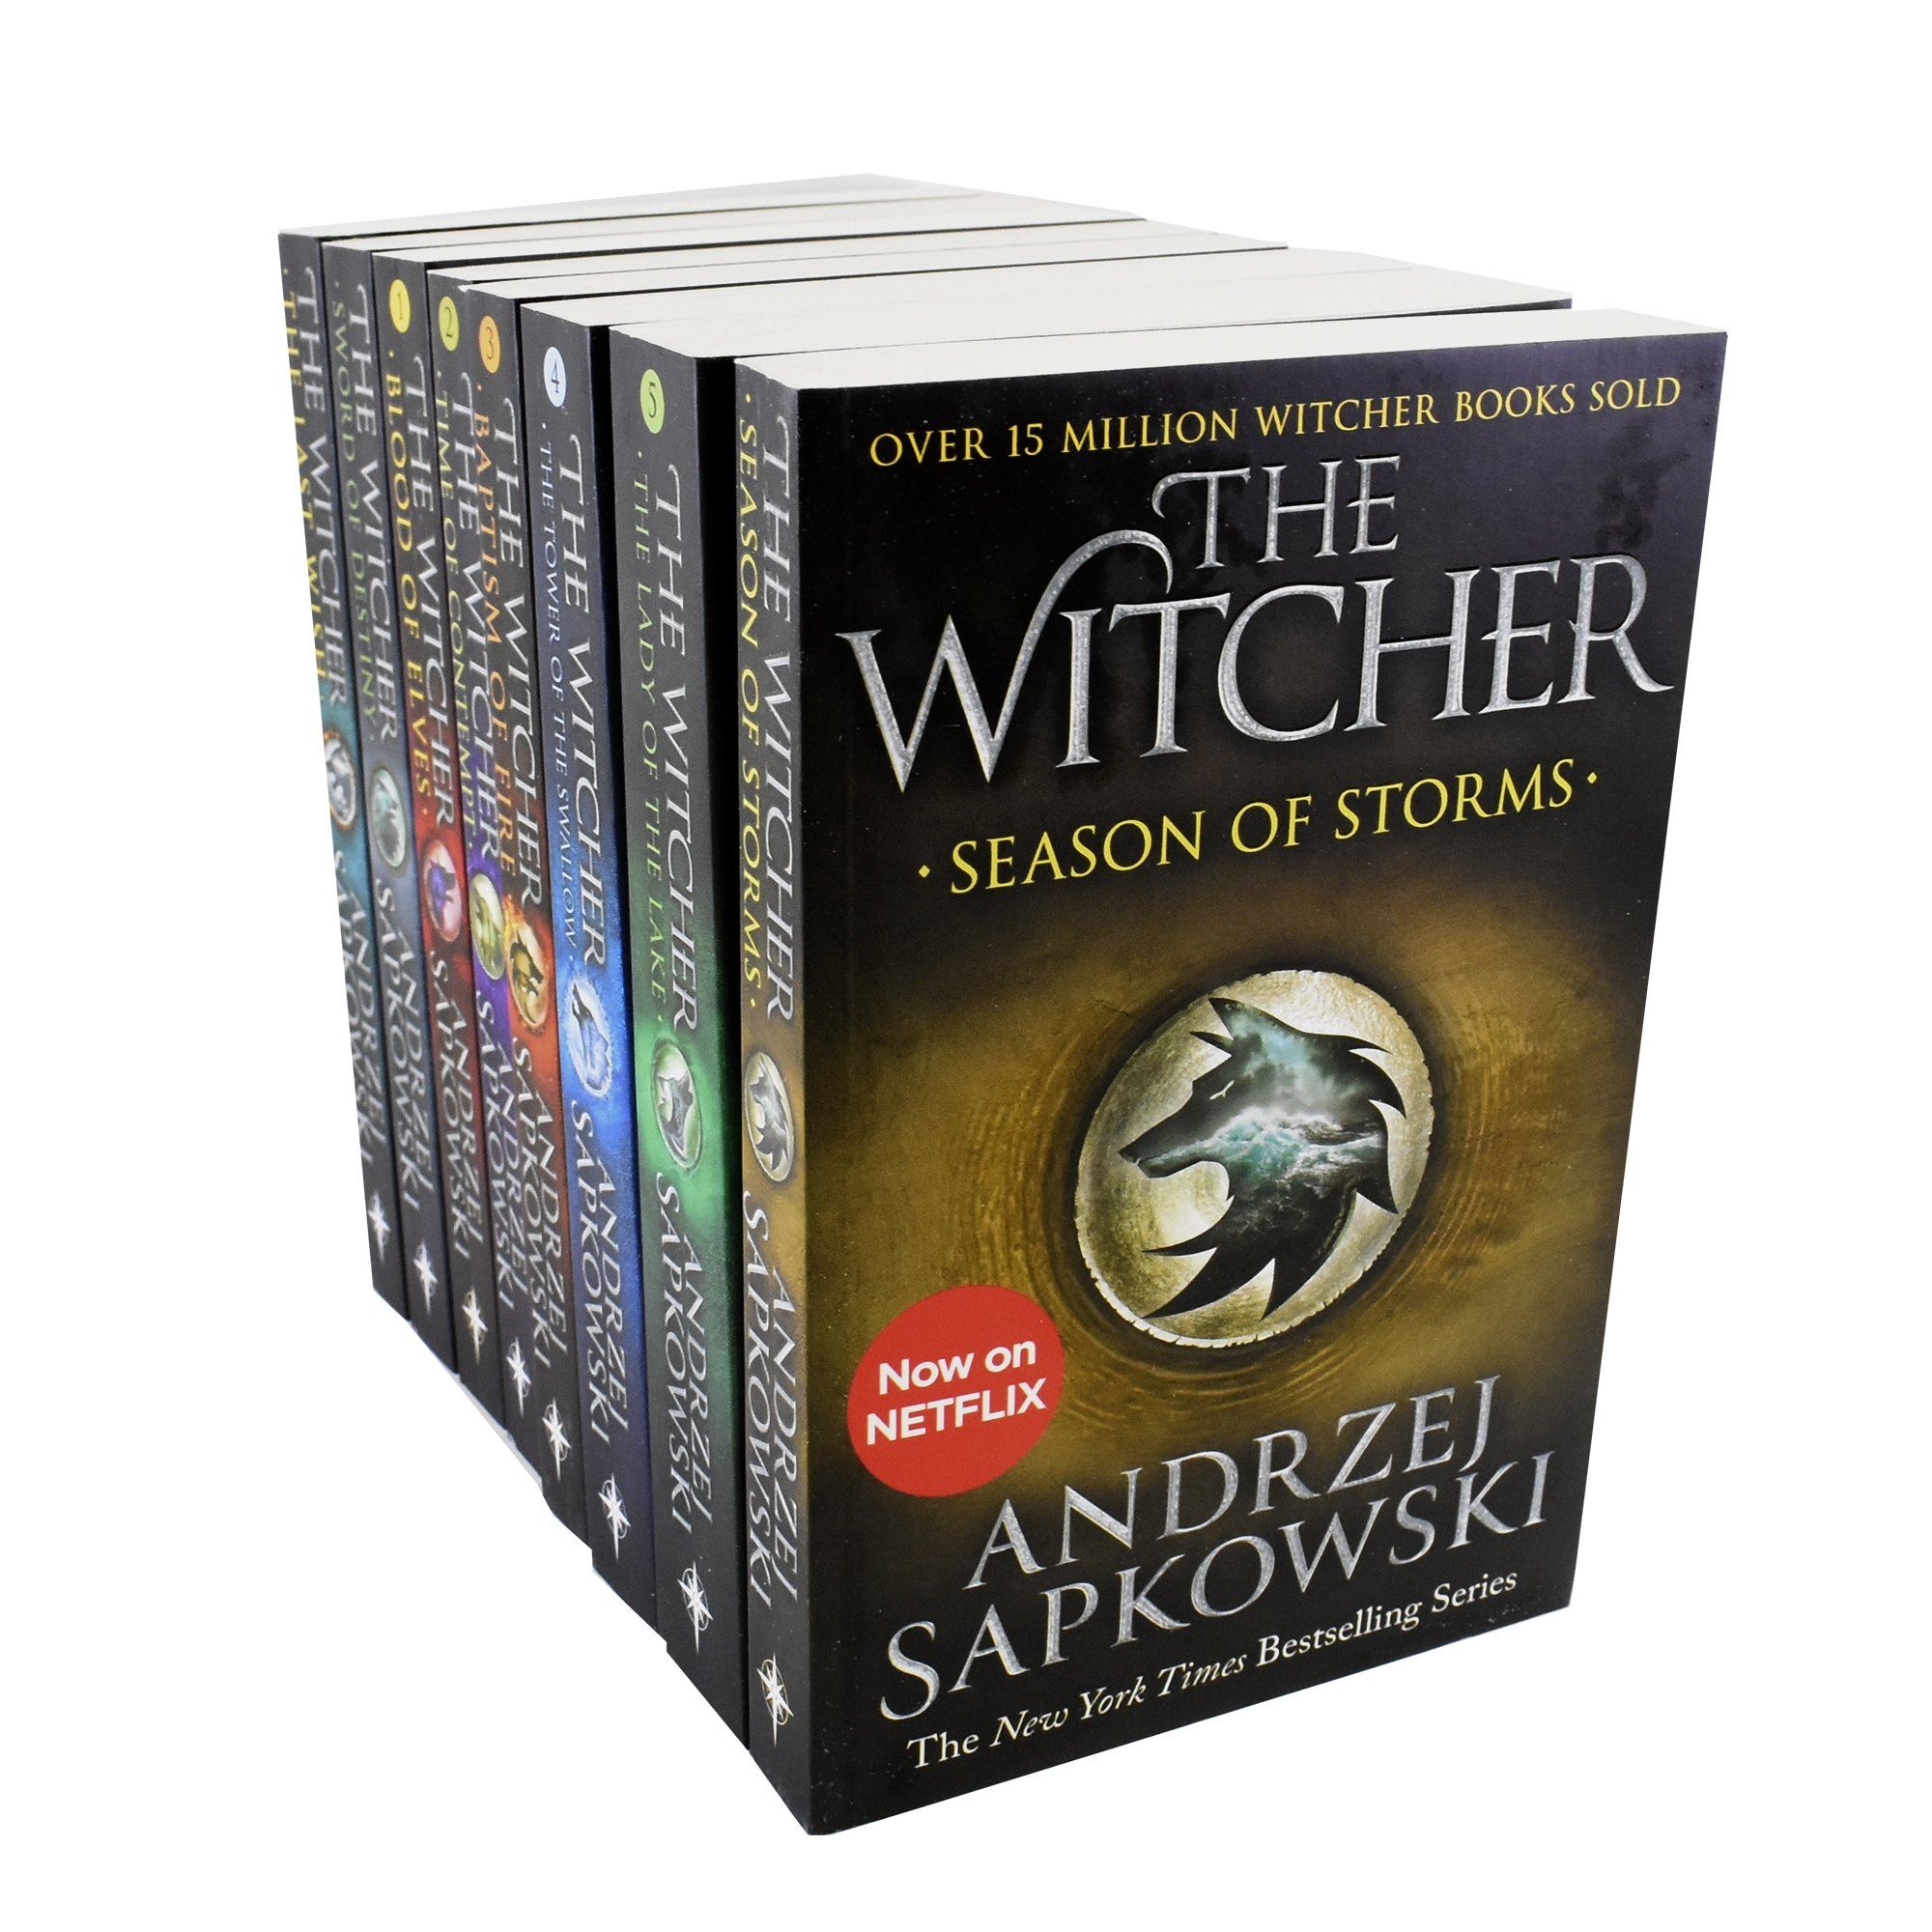 The Witcher Complete Series By Andrzej Sapkowski 8 Books Box Set Collection - Fiction - Paperback